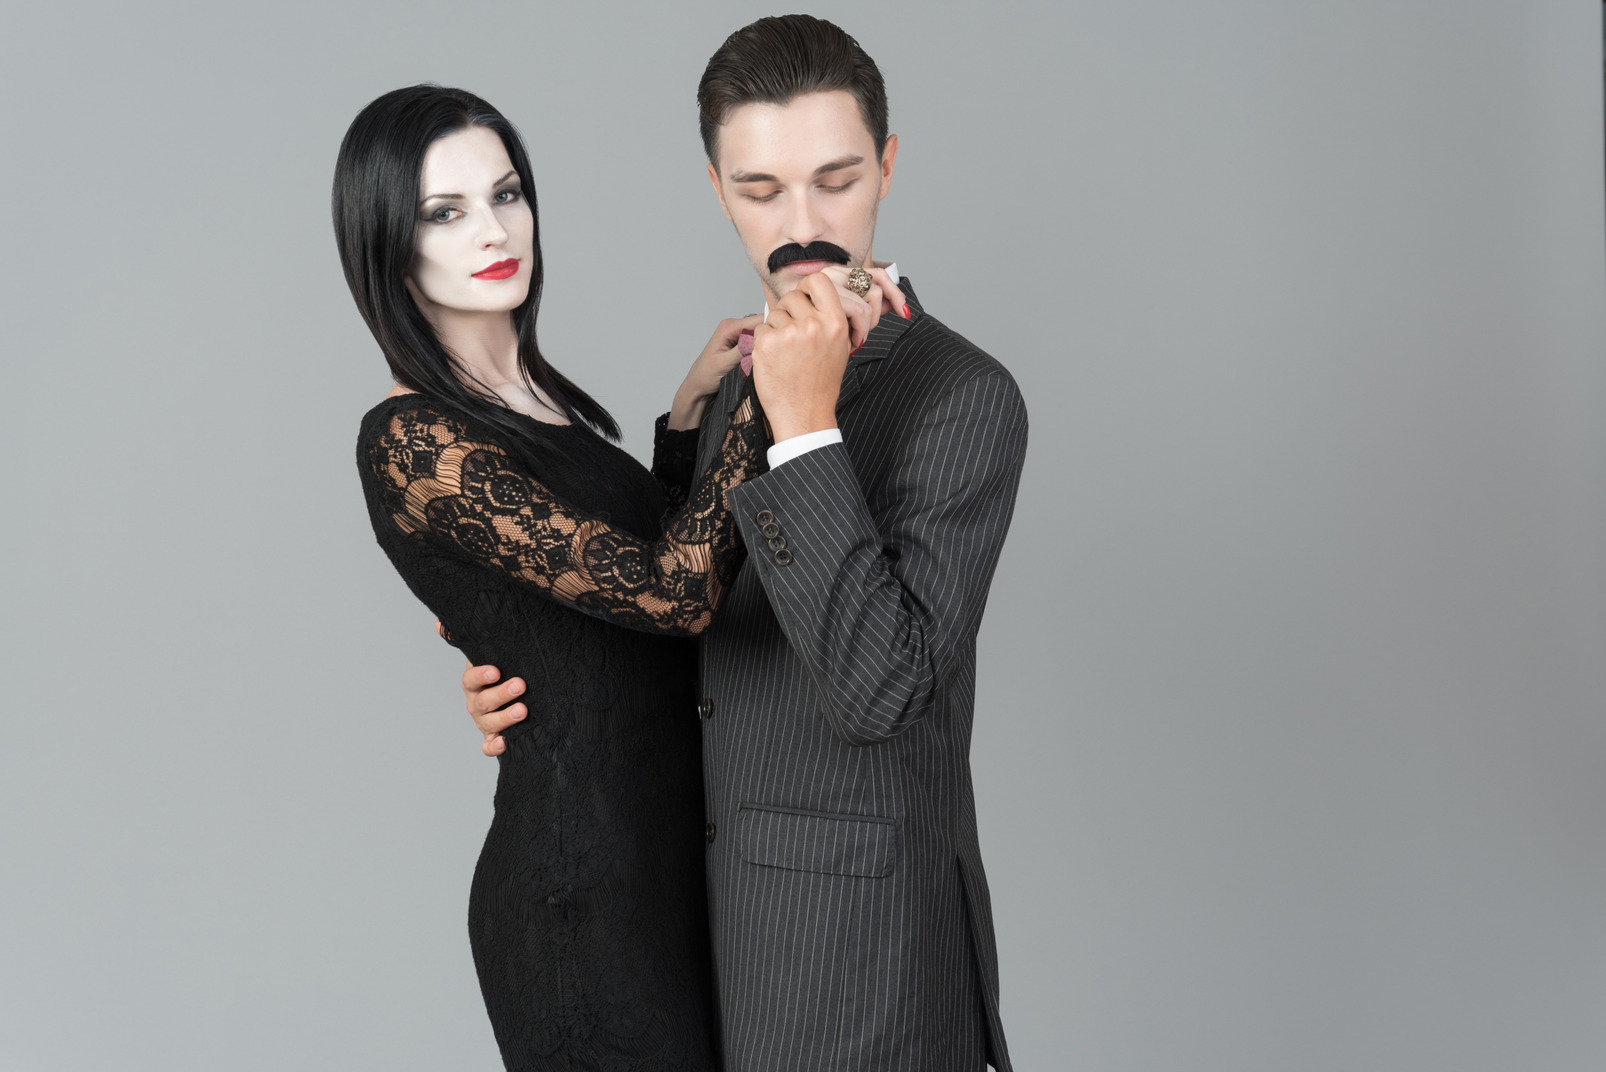 Morticia and gomez relationship is so great